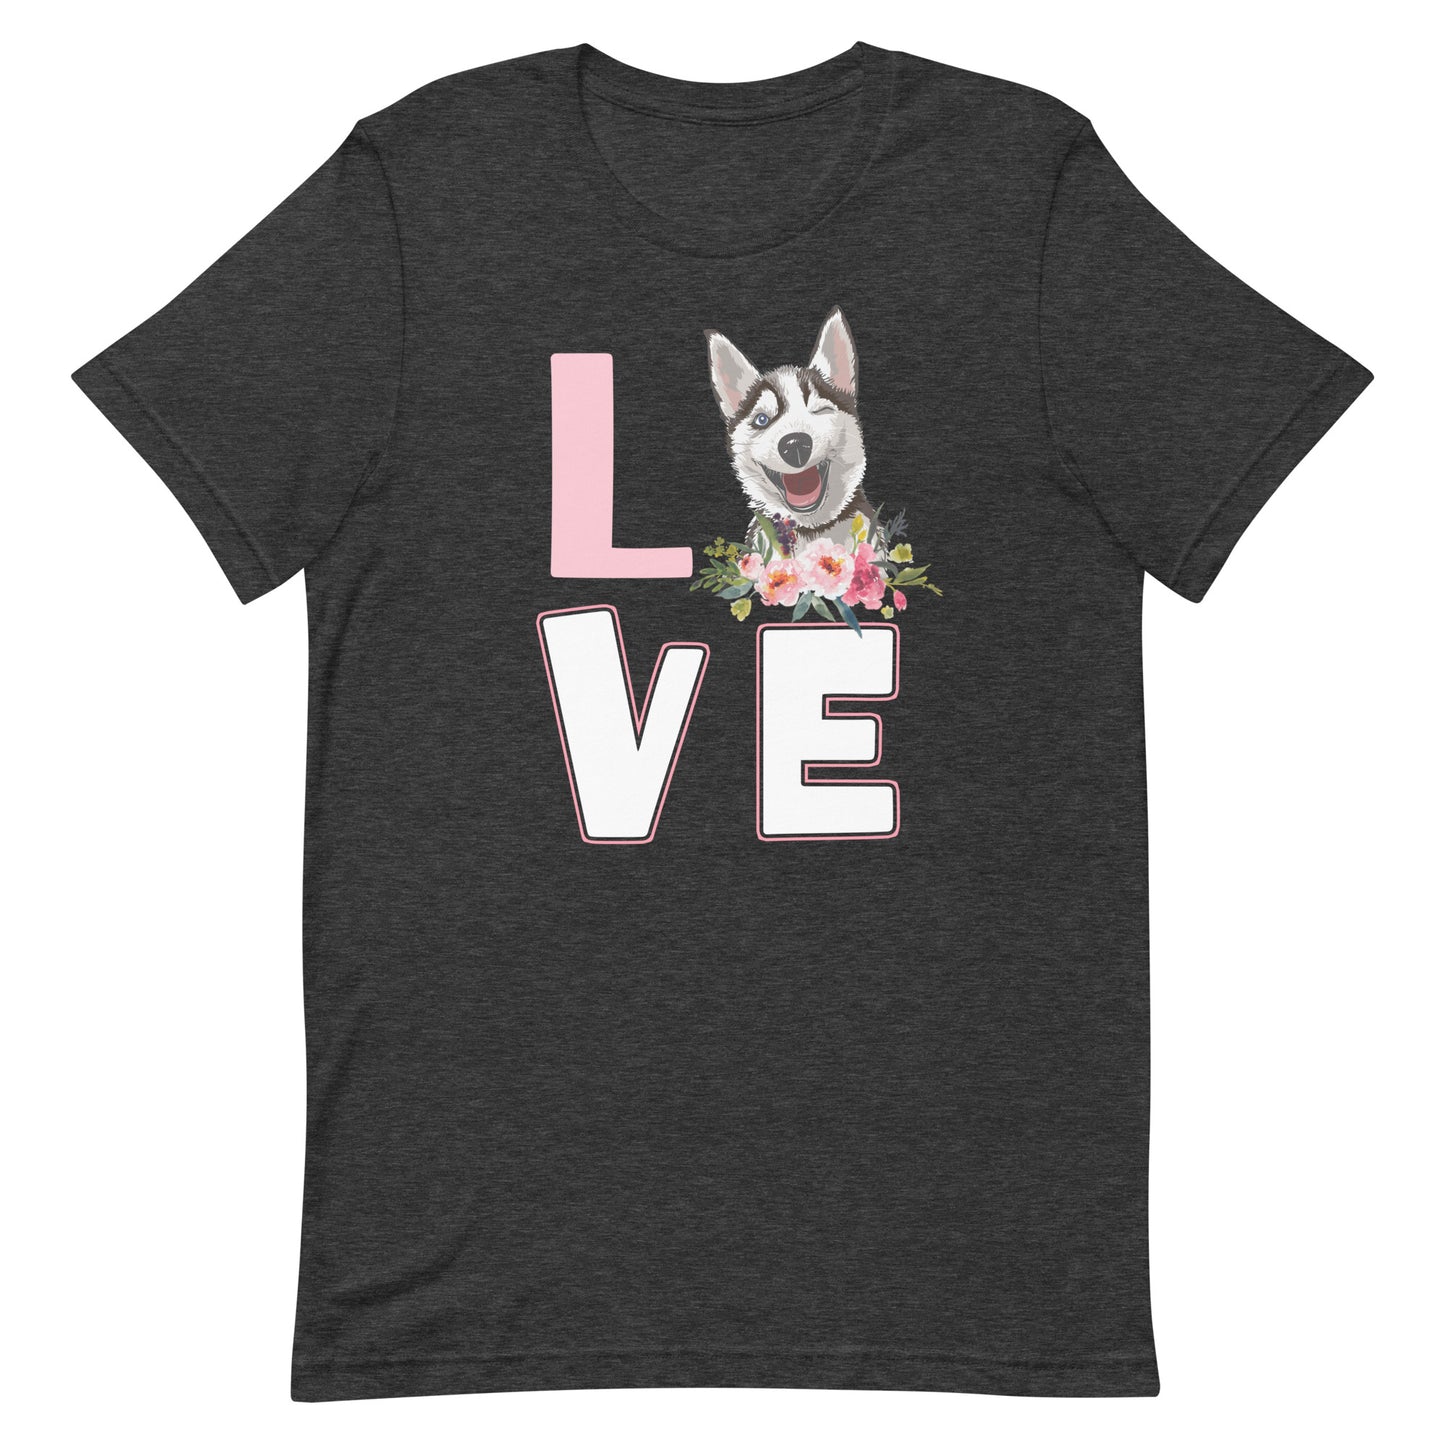 Dog Love T-Shirt for Dog Lovers